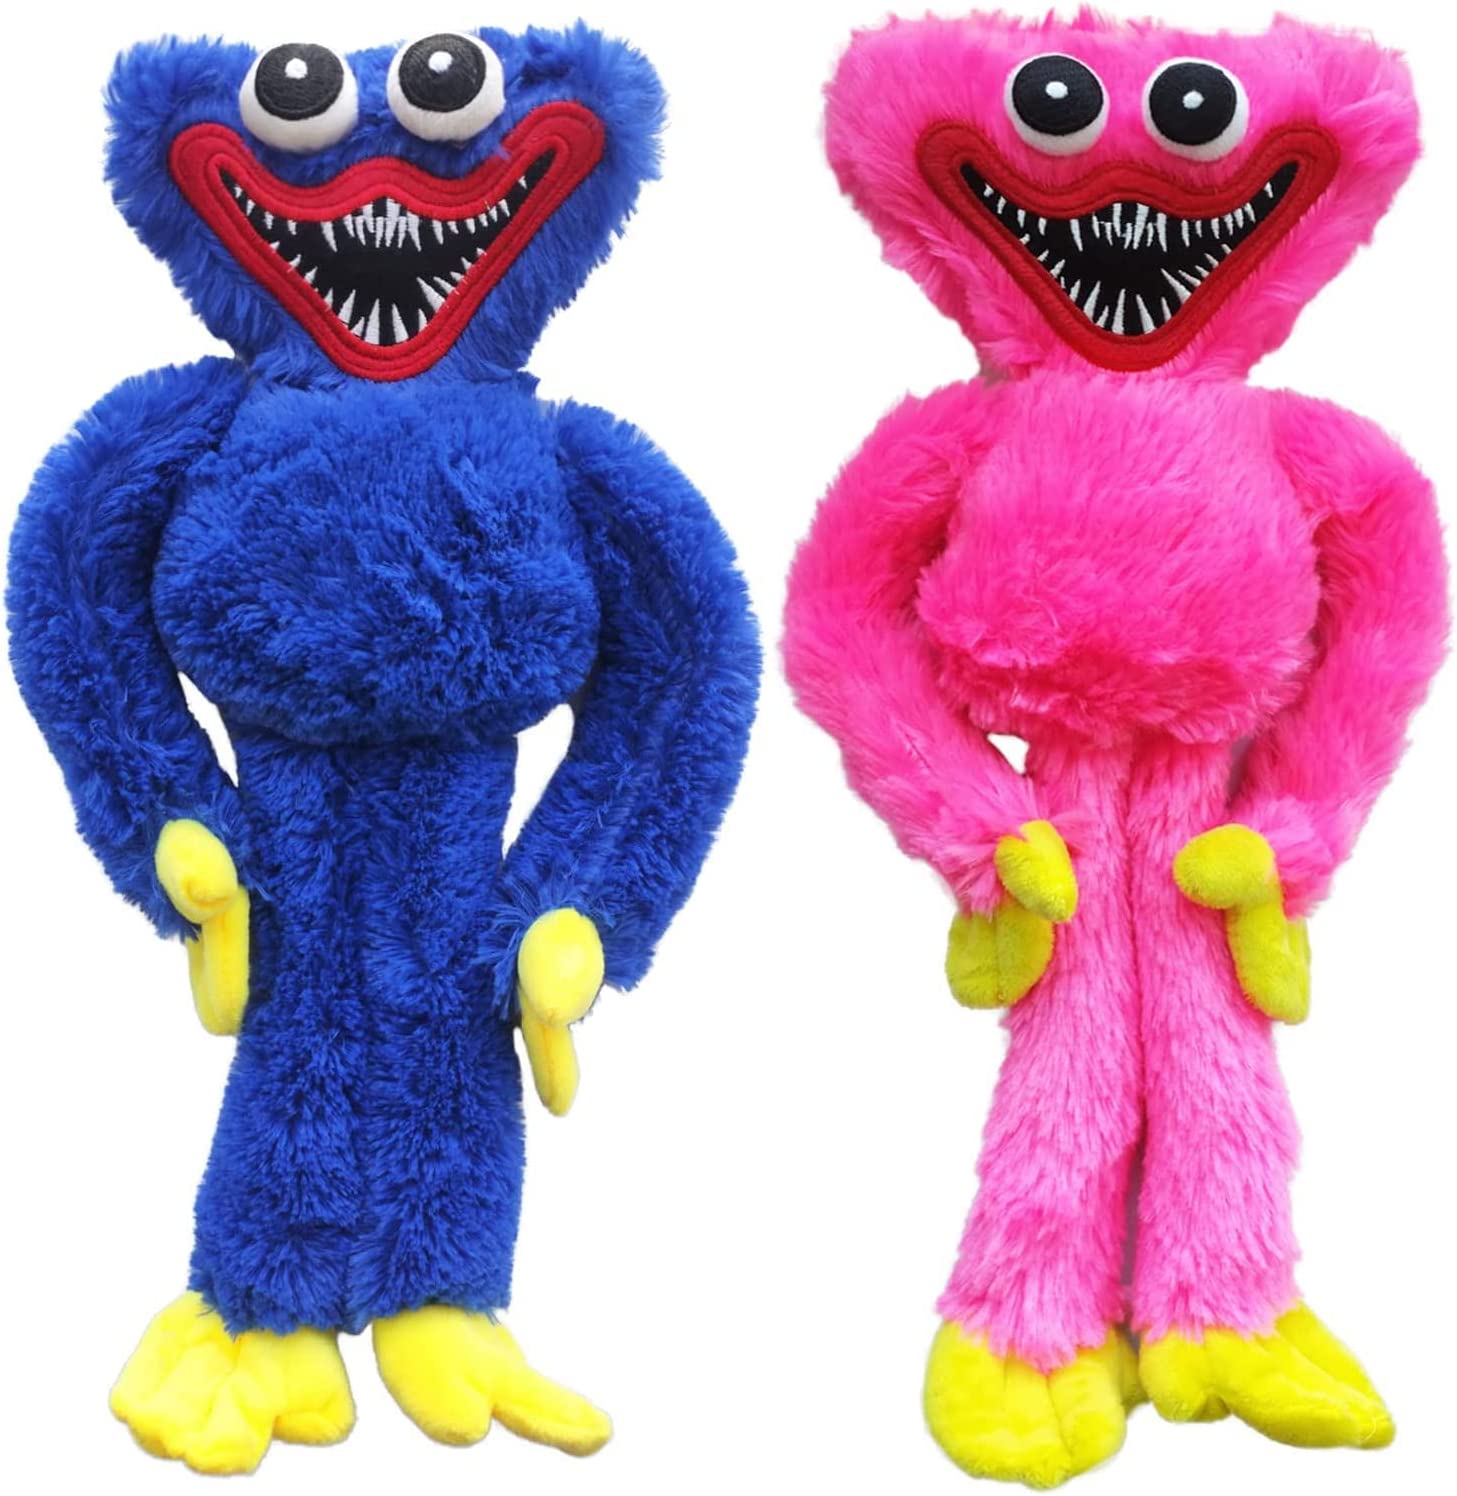 2Pcs Huggy Wuggy Plush Toy, Monster Horror Stuffed Doll Gifts for Game Fan’s ，Birthday Toy15.8 in